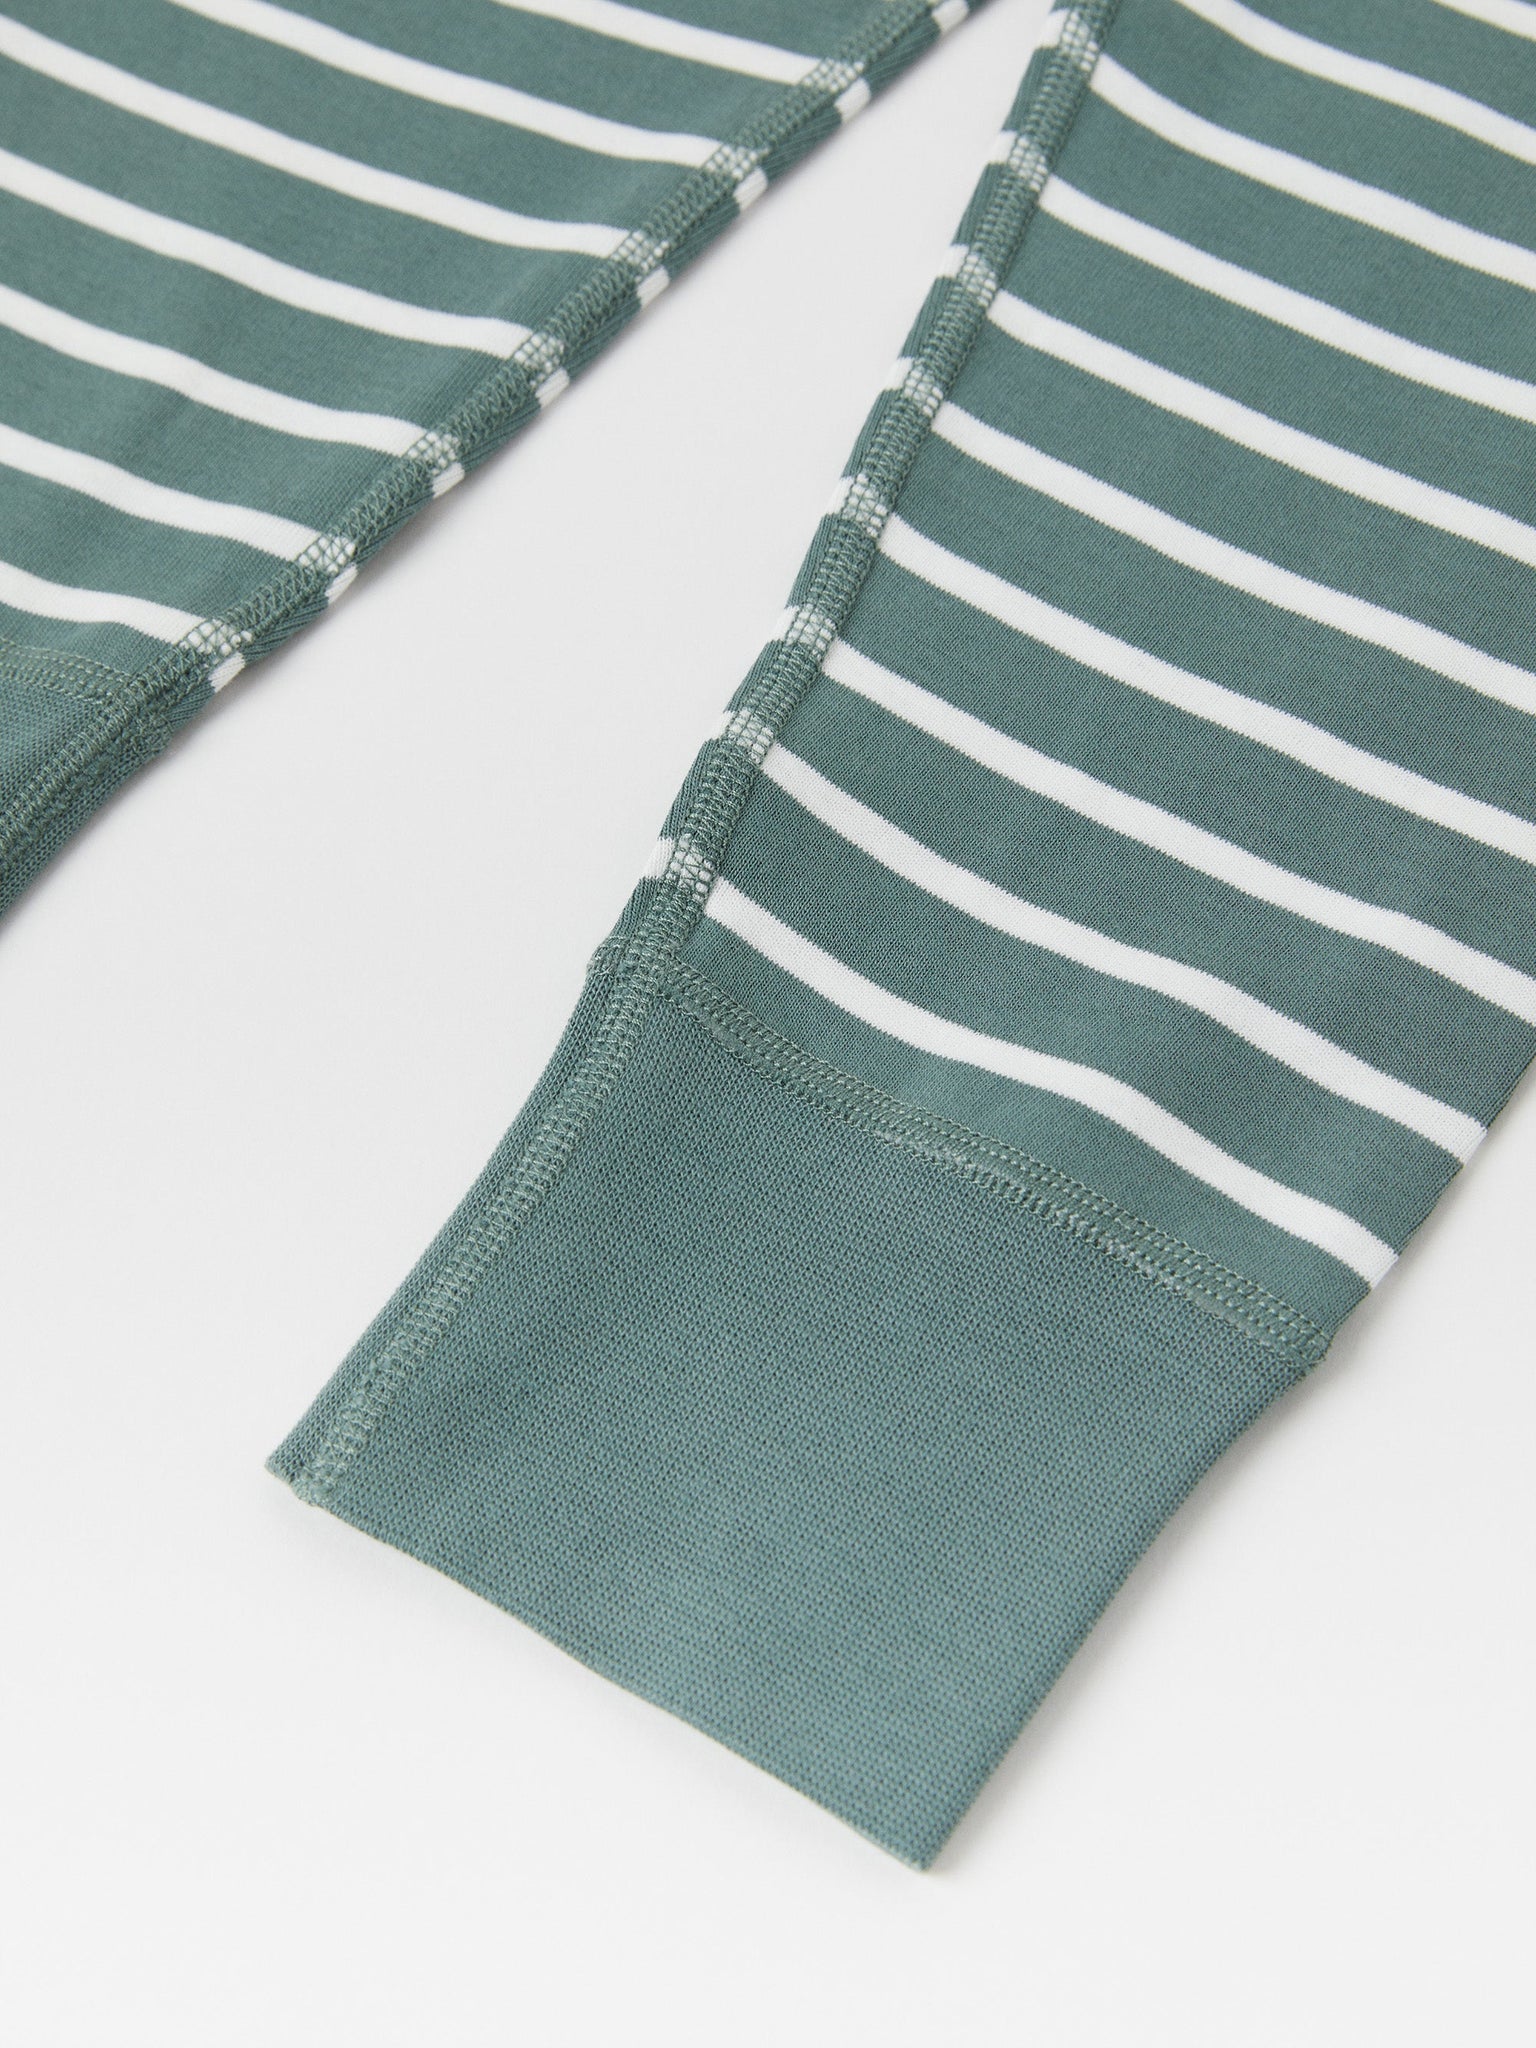 Organic Cotton Green Kids Leggings from the Polarn O. Pyret kidswear collection. Clothes made using sustainably sourced materials.